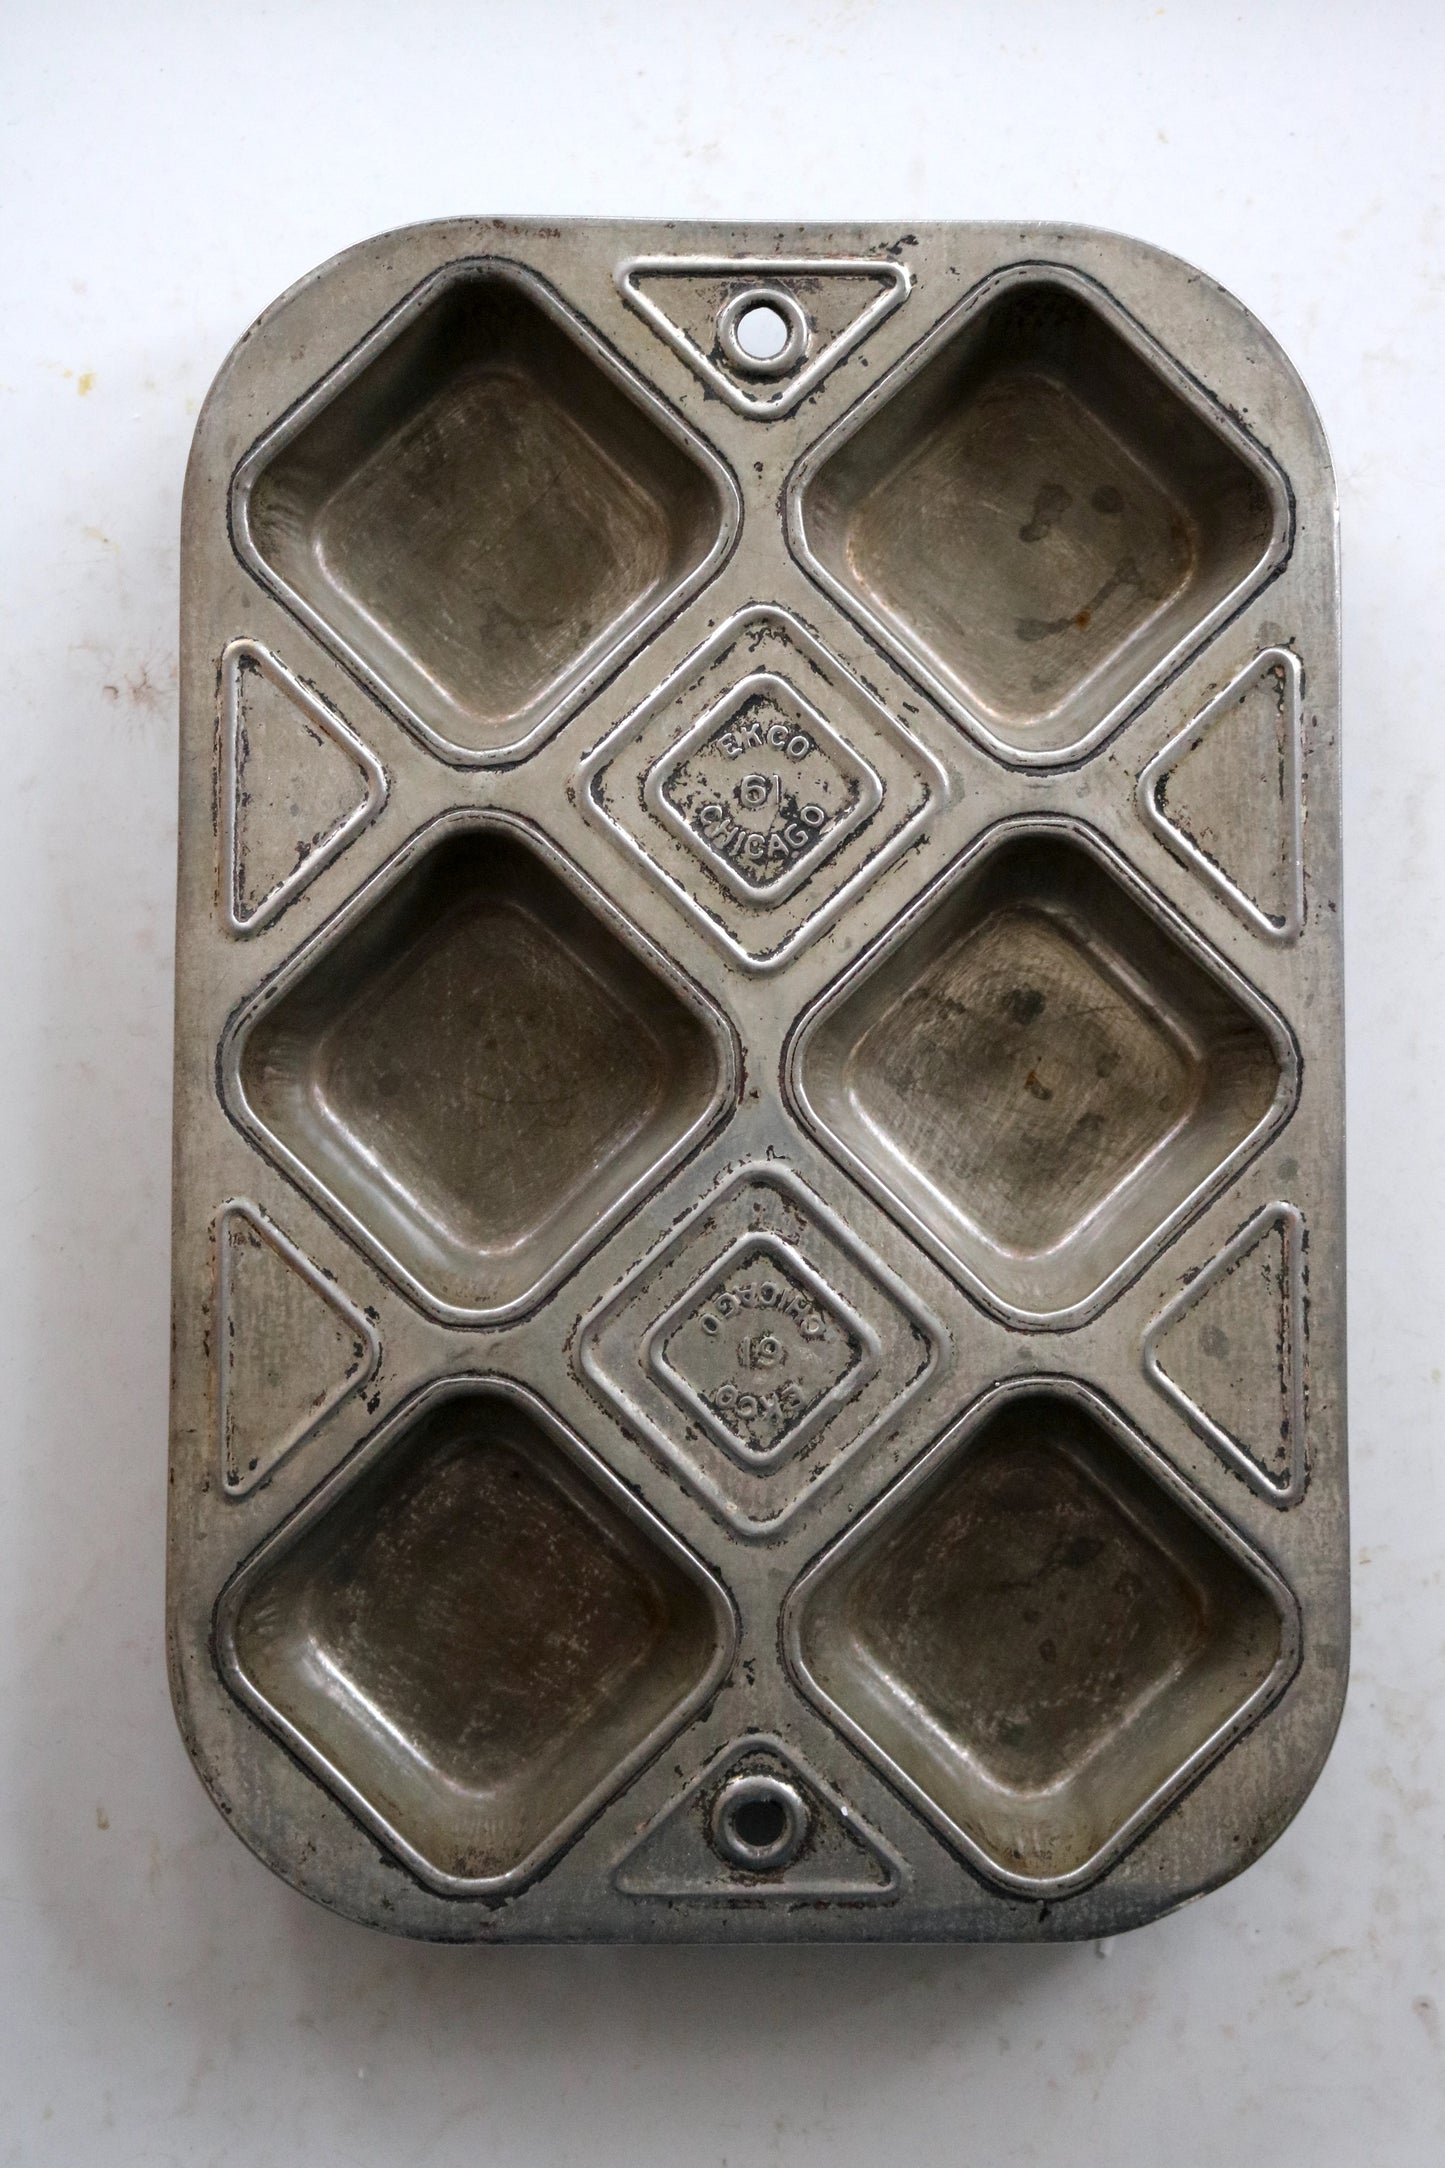 vintage Ekco Chicago muffin or cake tin - food styling prop